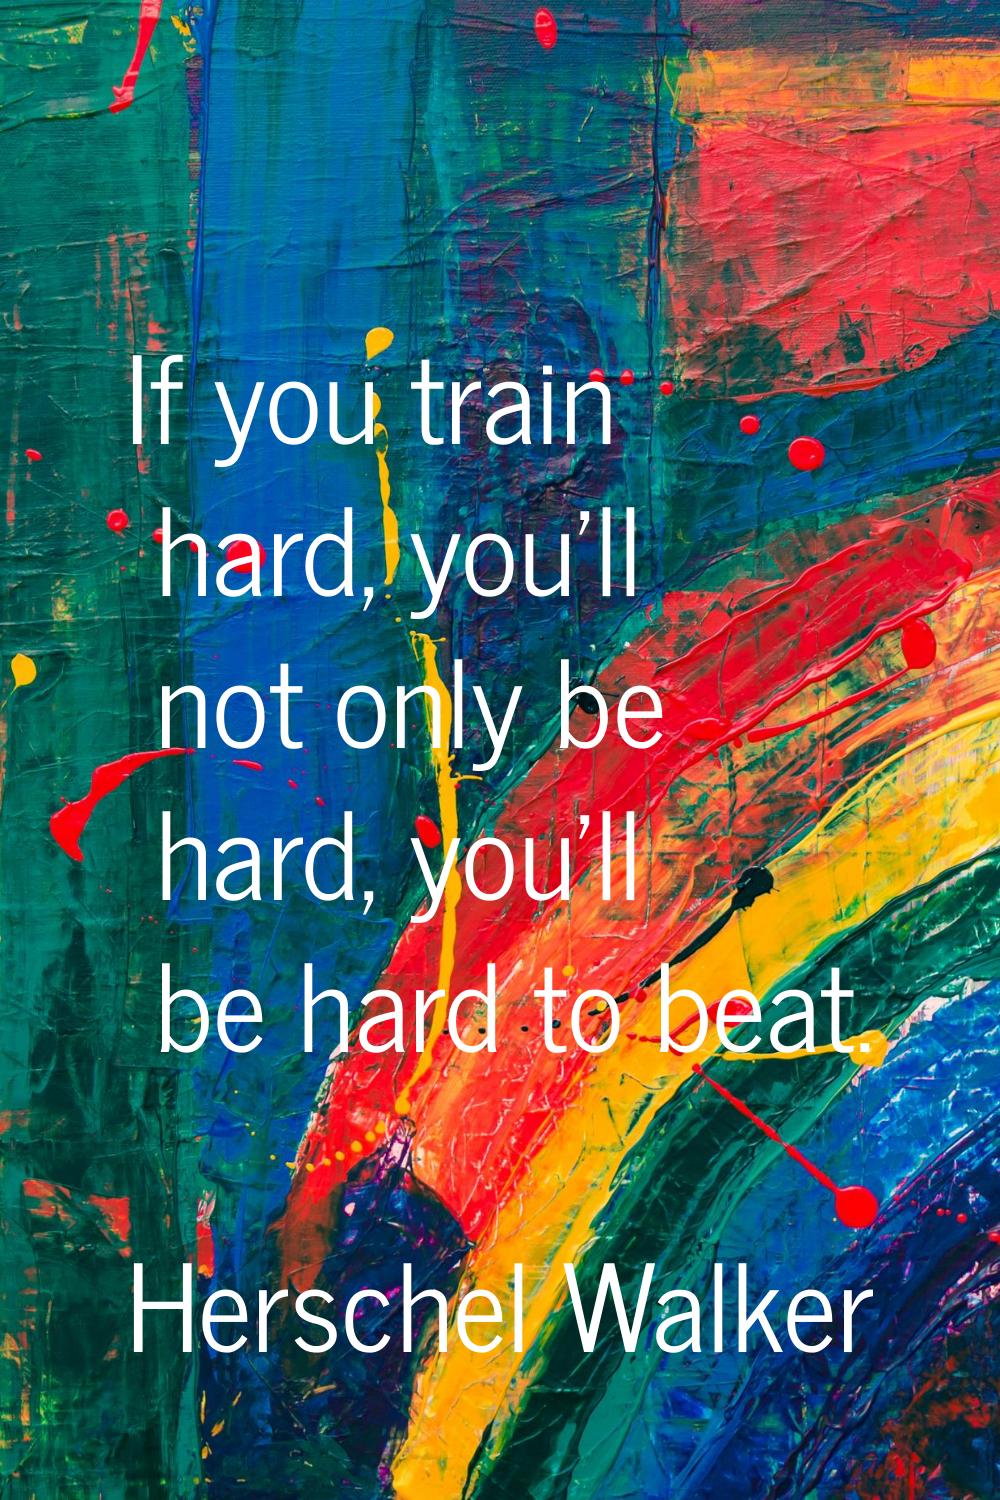 If you train hard, you'll not only be hard, you'll be hard to beat.